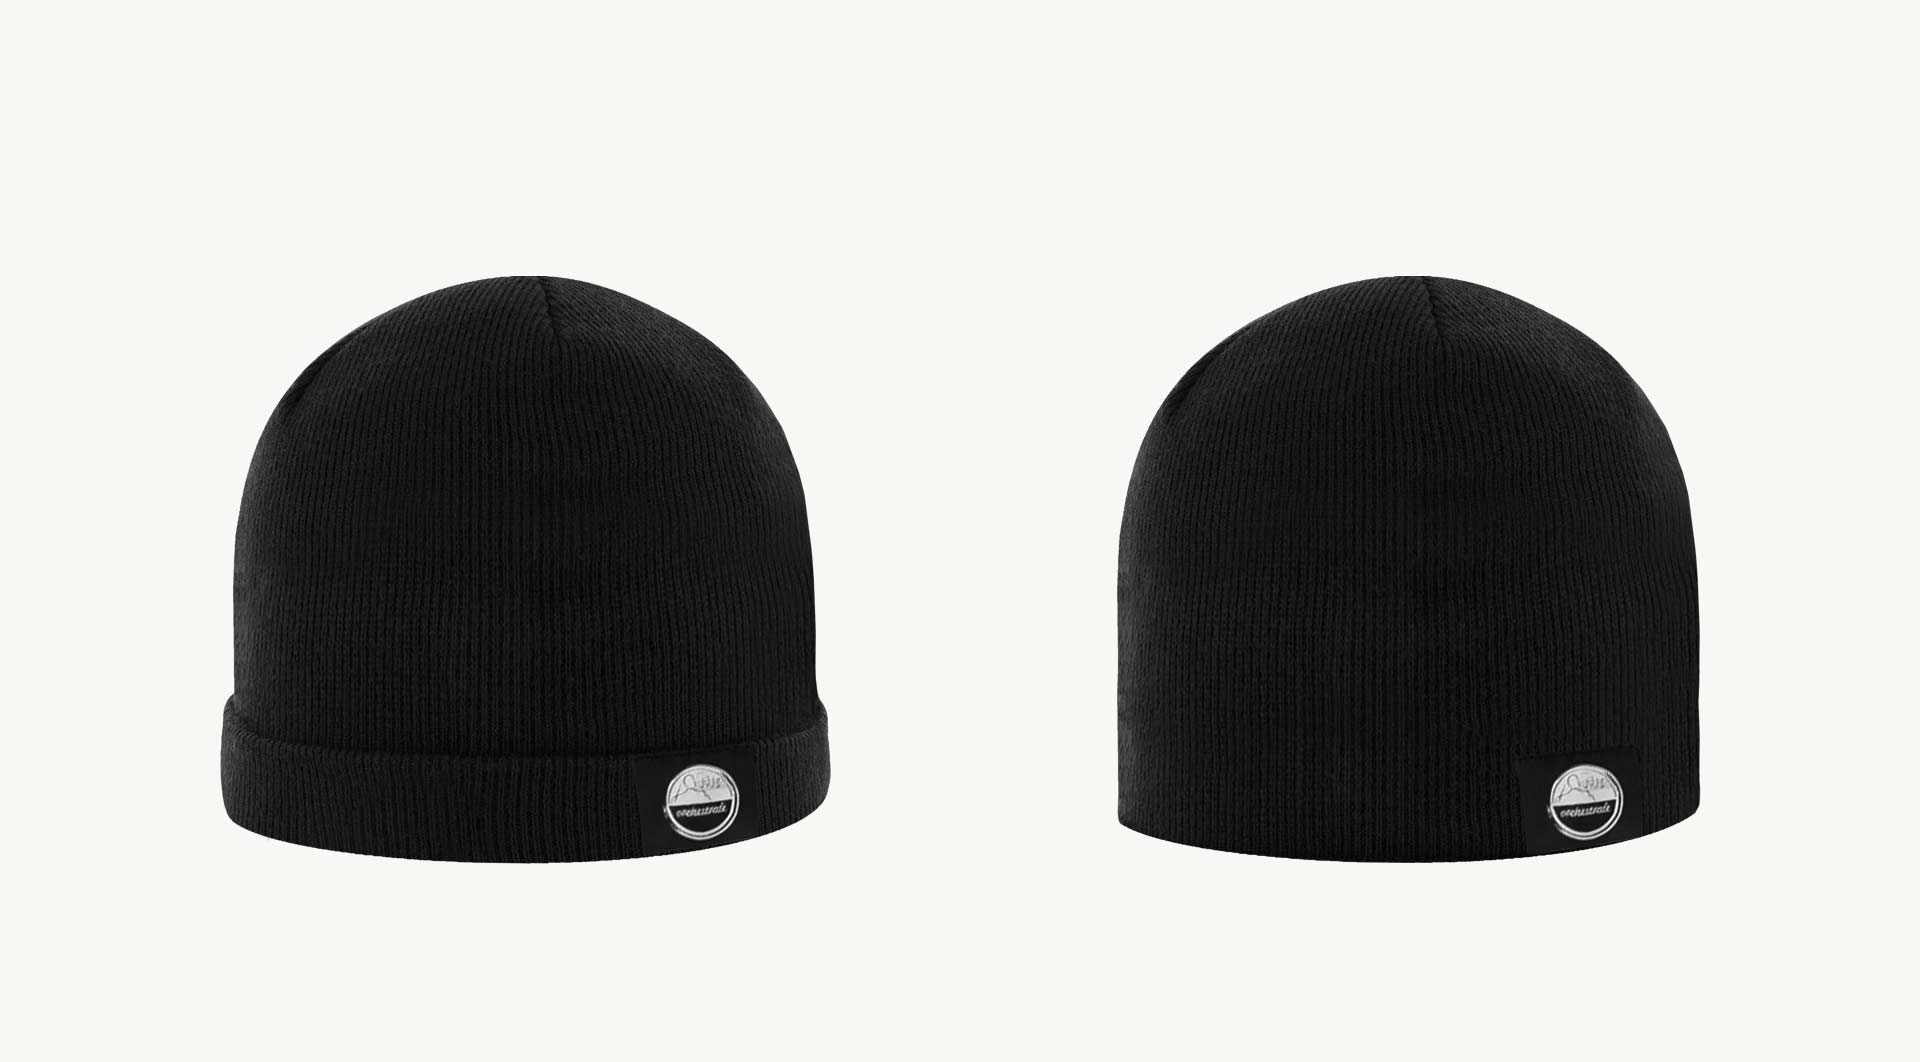 Orchestrale Coffee Machines clothing cuffeed beanie or pull-on beanie black with logo